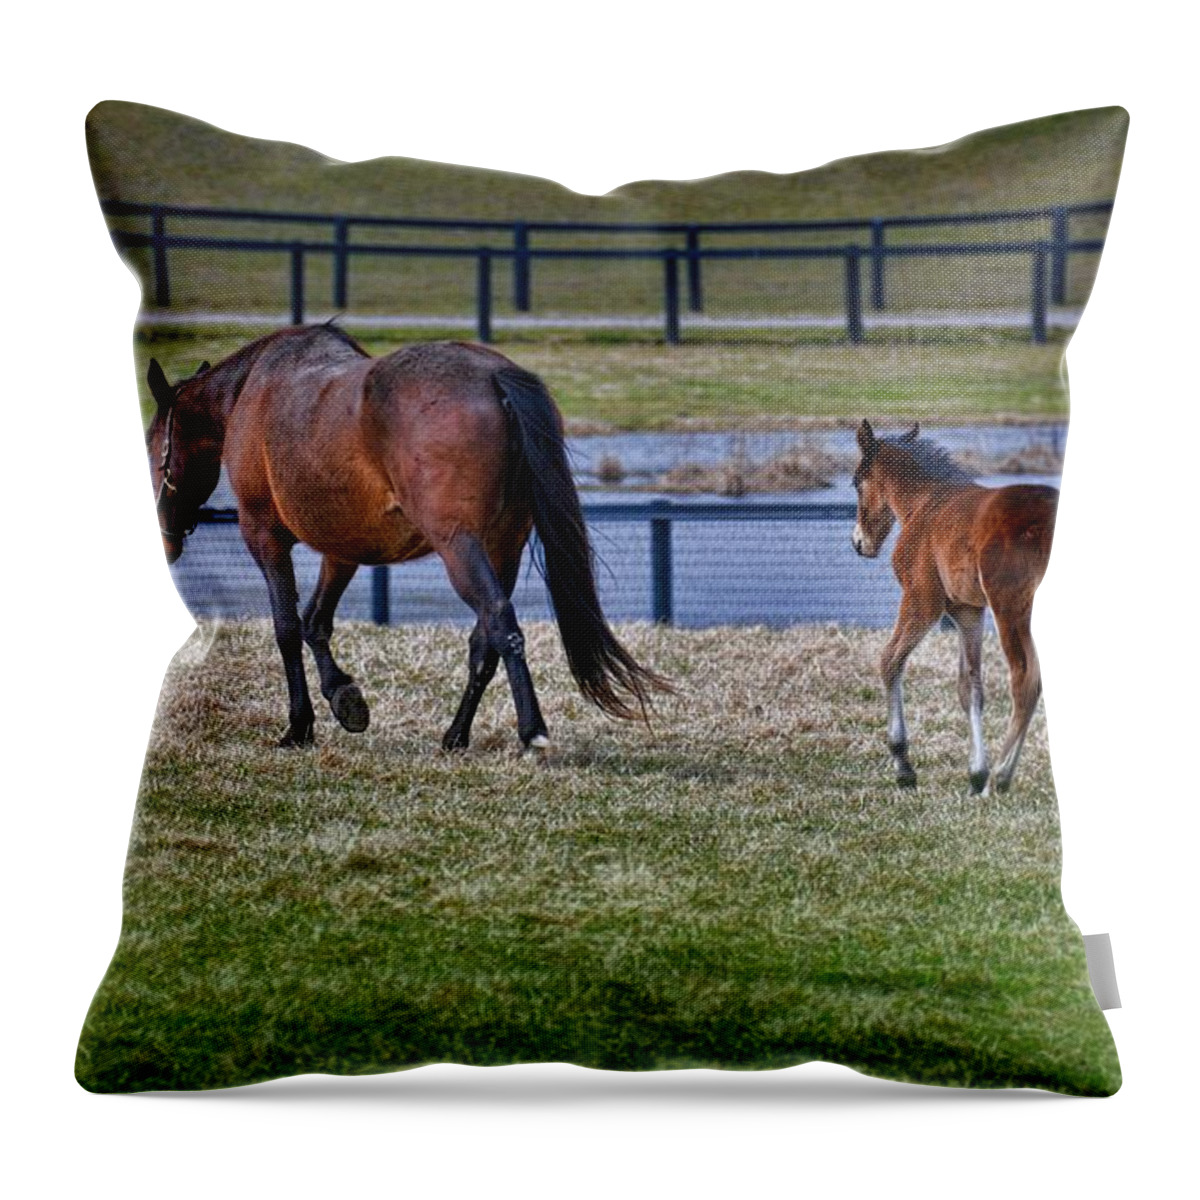 Horse Throw Pillow featuring the photograph Mom Leading The Way by Henry Kowalski